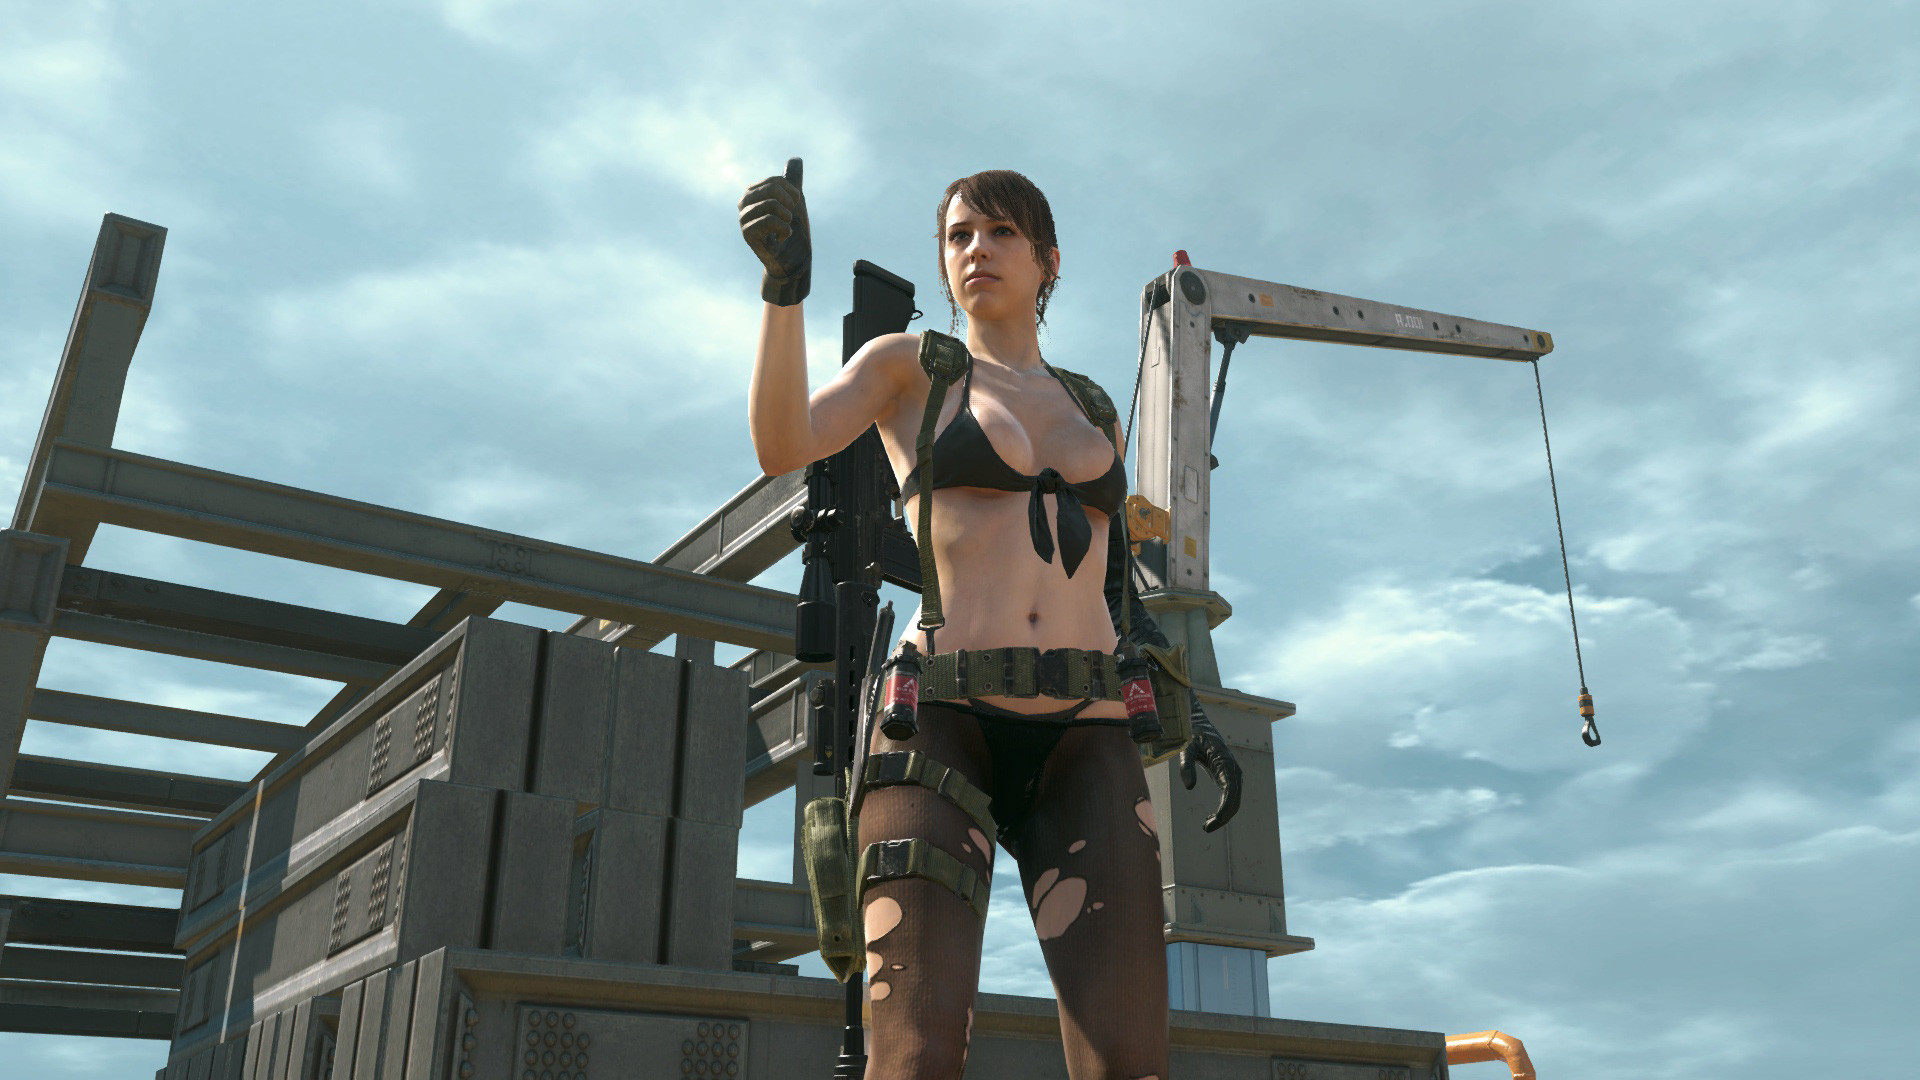 1920x1080 Metal Gear Online update will introduce 'Sabotage' mode, DLC prices revealed